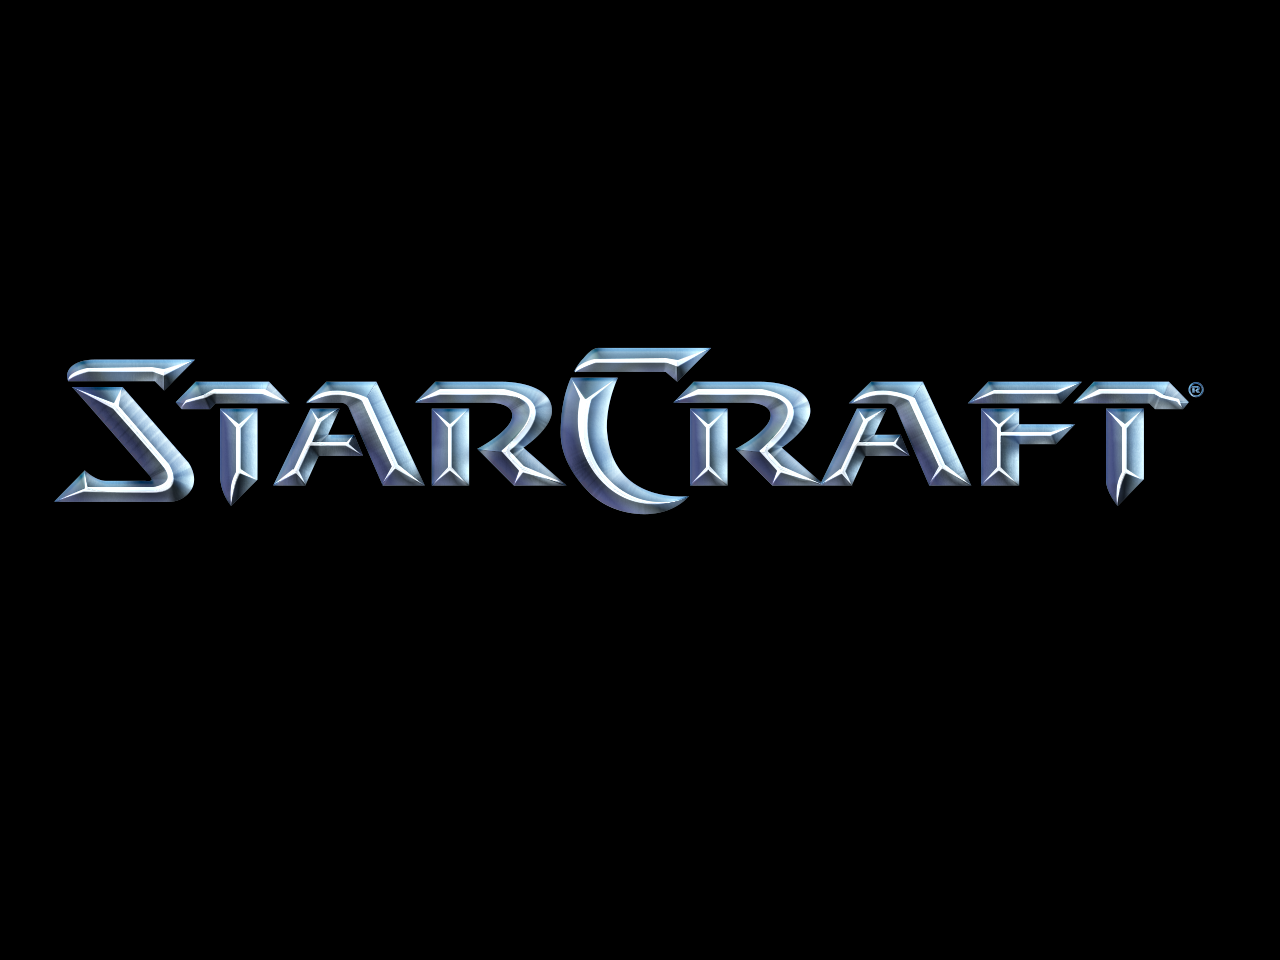 StarCraft 1 BWAPI - Running multiple AI modules on Local PC with different races